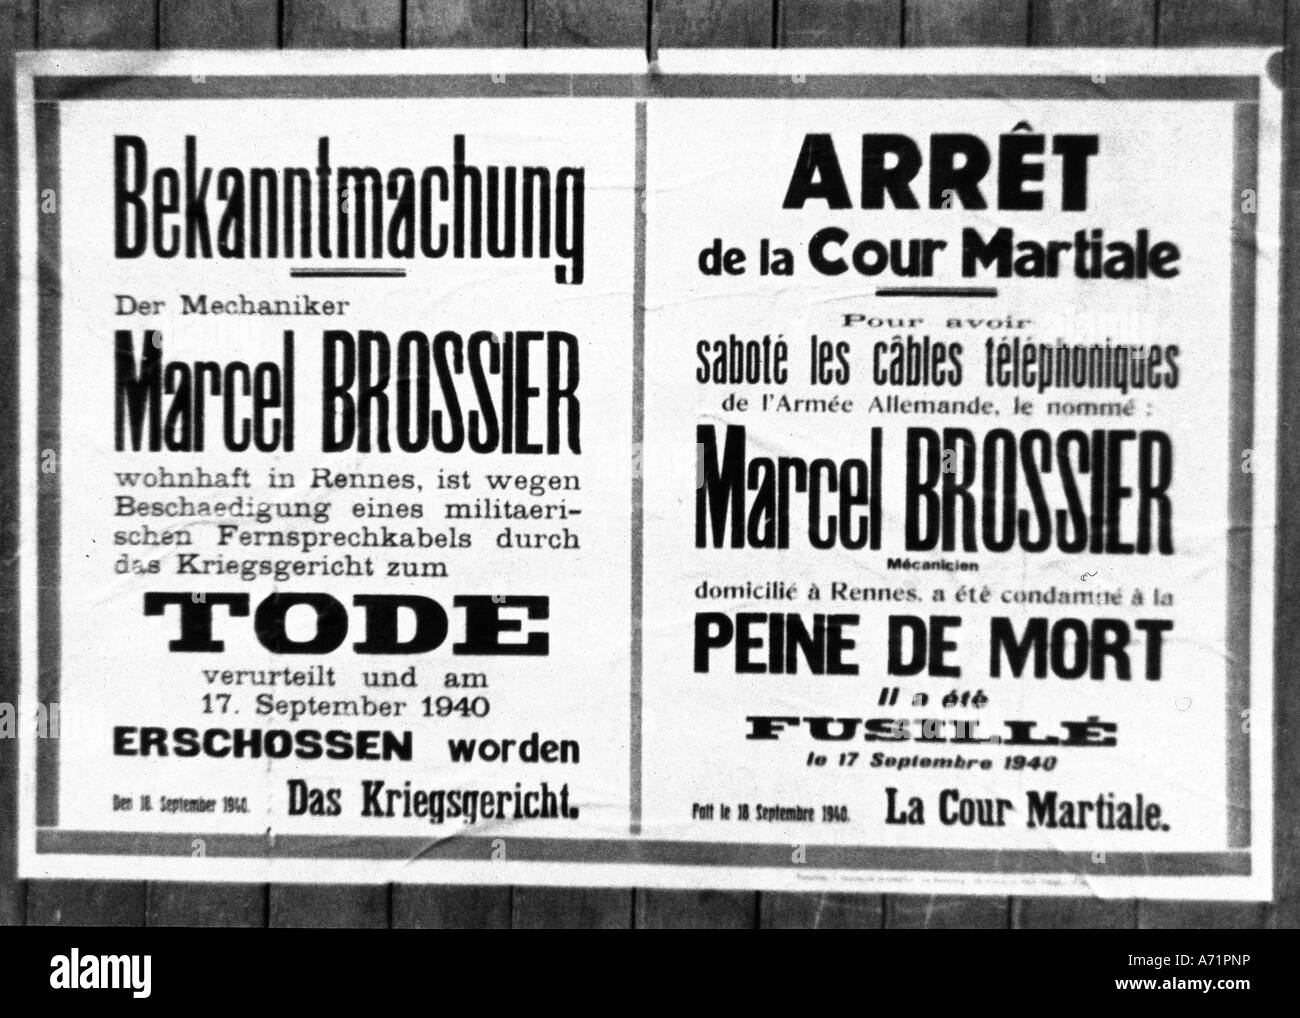 events, Second World War / WWII, France, German occupation 1940 - 1944, bulletin announcing the death sentence against Marcel Brossier because of sabotage, Rennes 17.9.1940, German court-martial, military justice, poster, Germany, Third Reich, 20th century, historic, historical, Bretagne, 1940s, Stock Photo